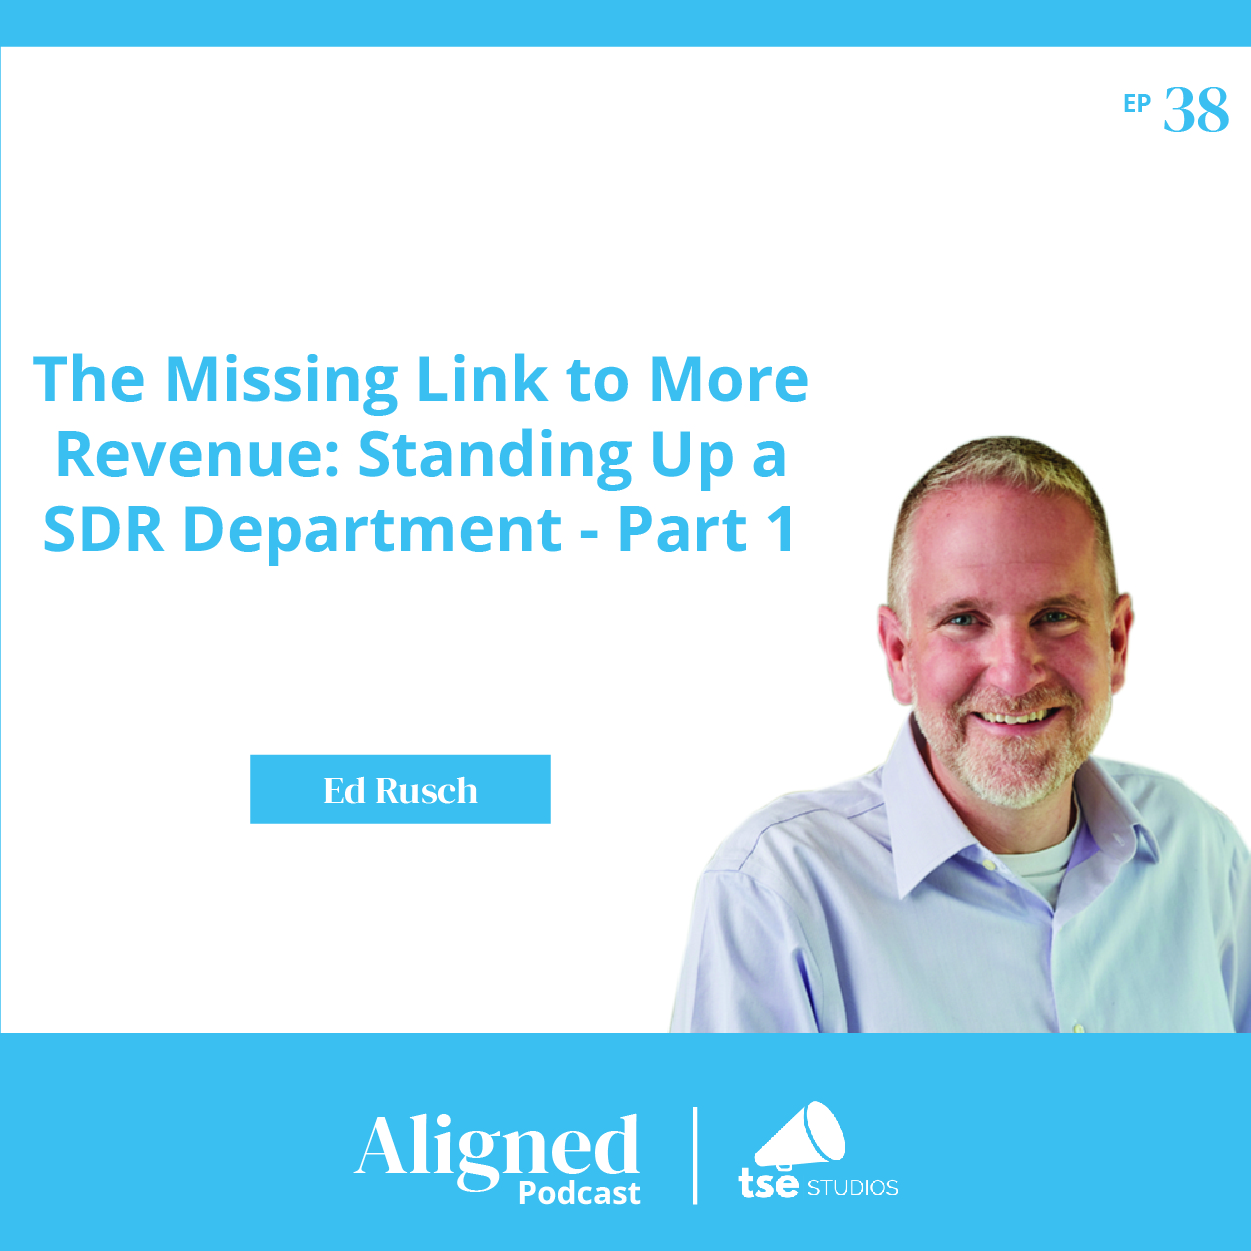 The Missing Link to More Revenue: Standing up a SDR Department - Part 1